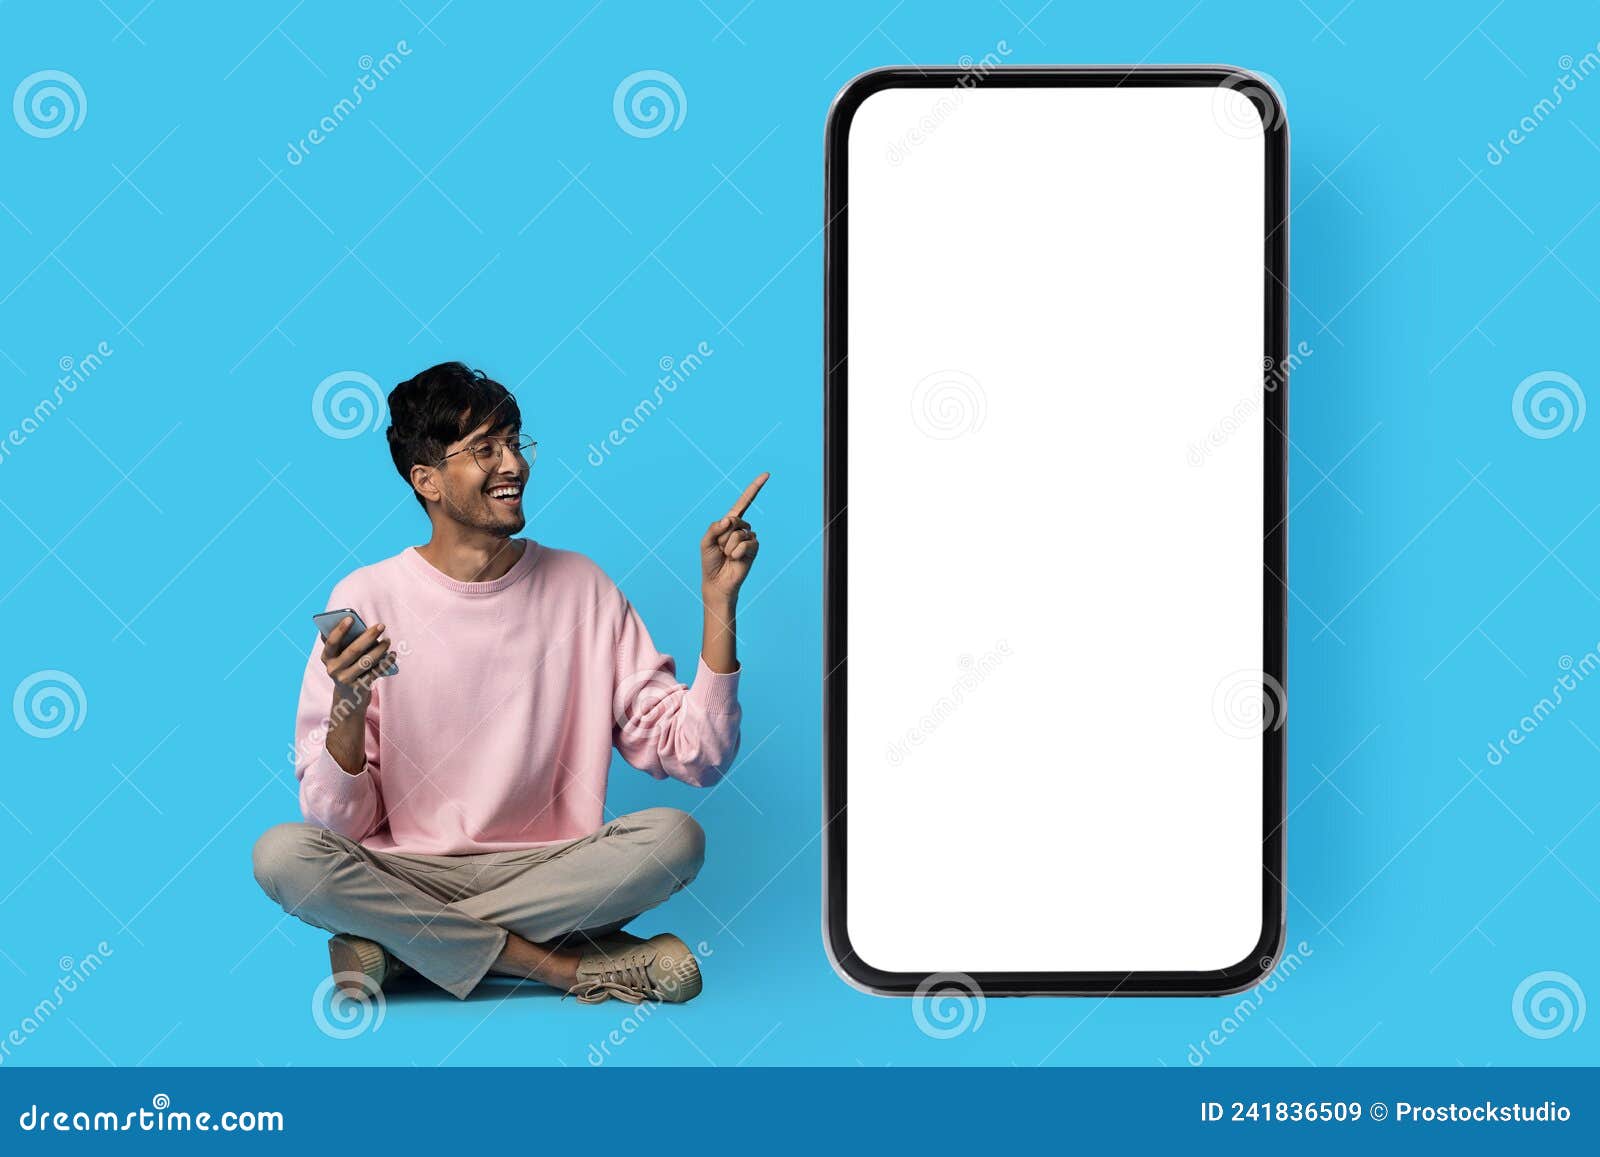 happy indian guy pointing at huge smartphone with blank screen